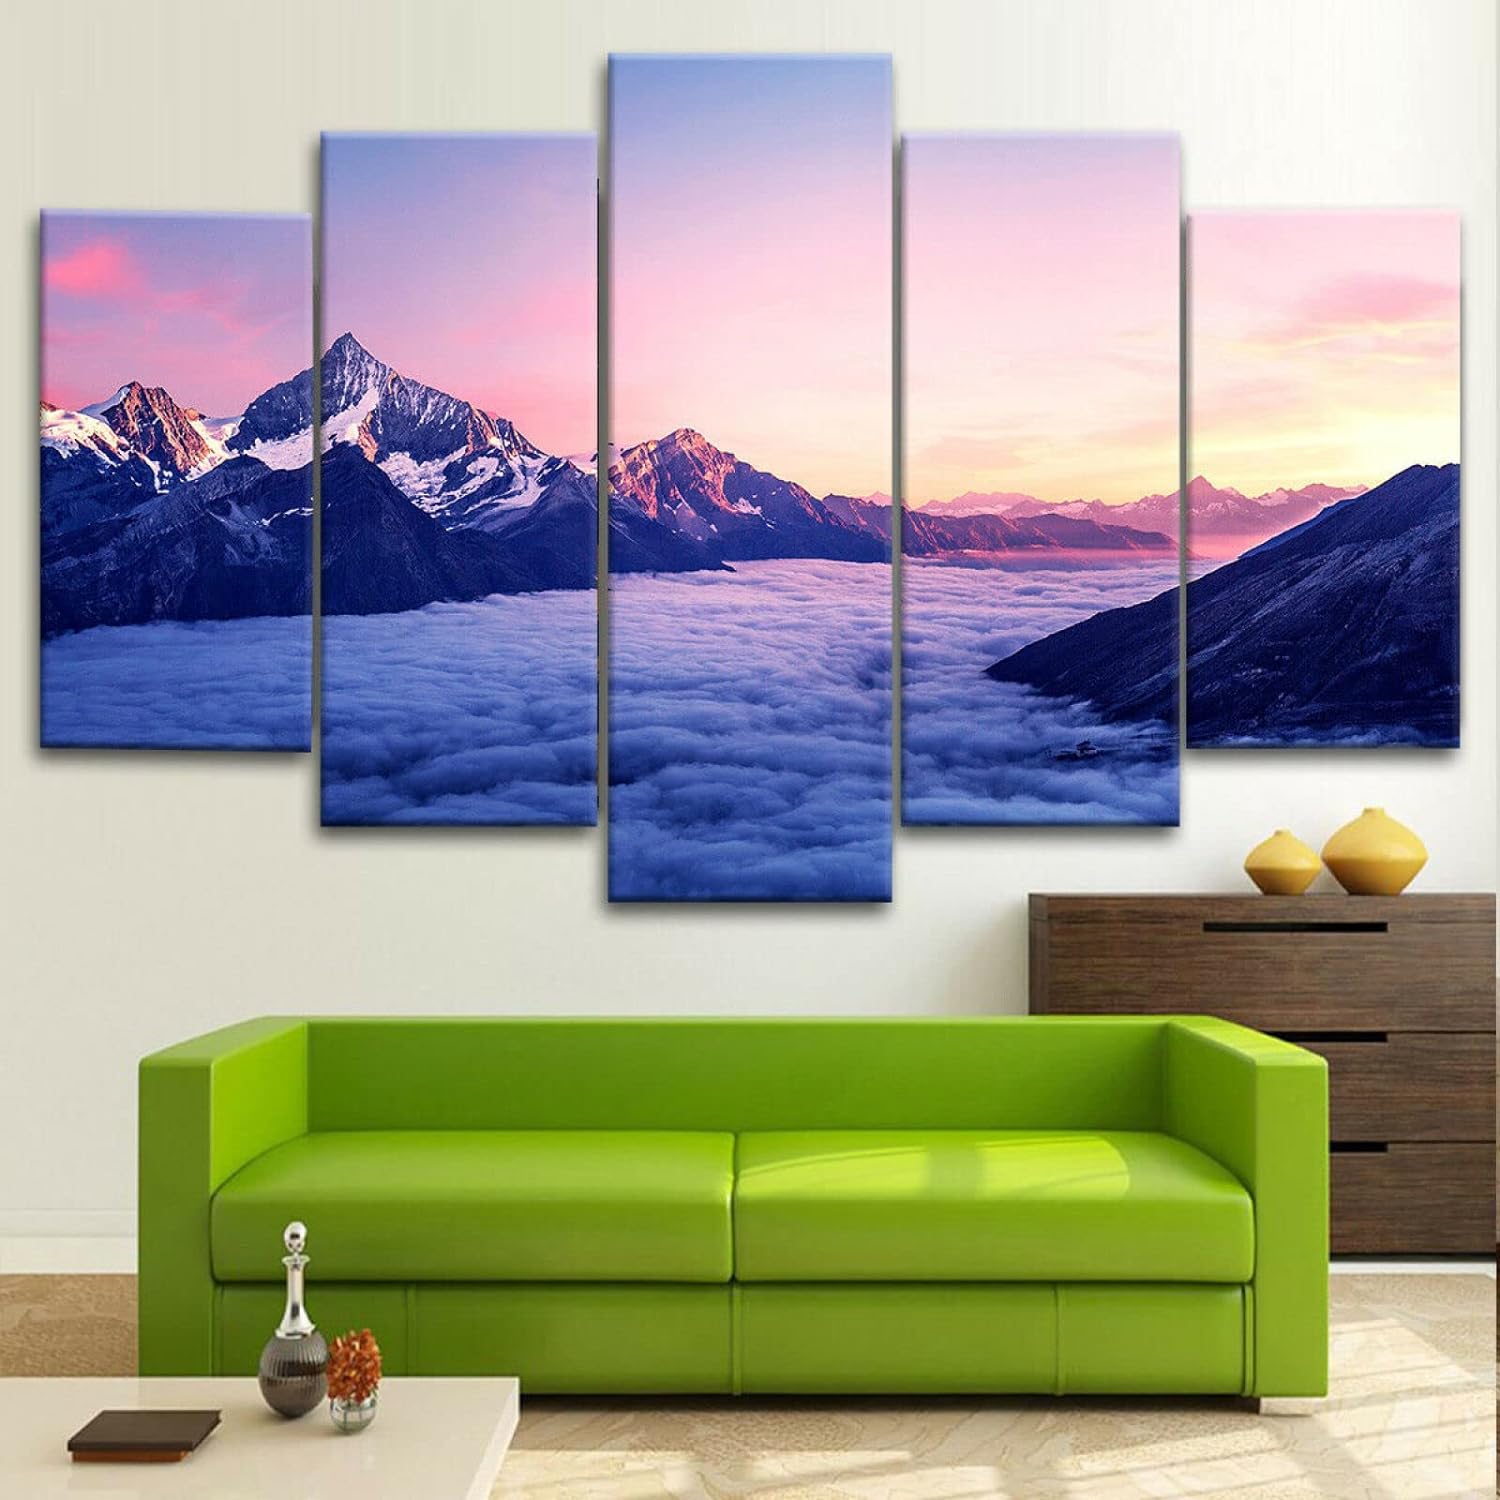 8 Incredible 5 Panel Canvas Wall Art for 2023